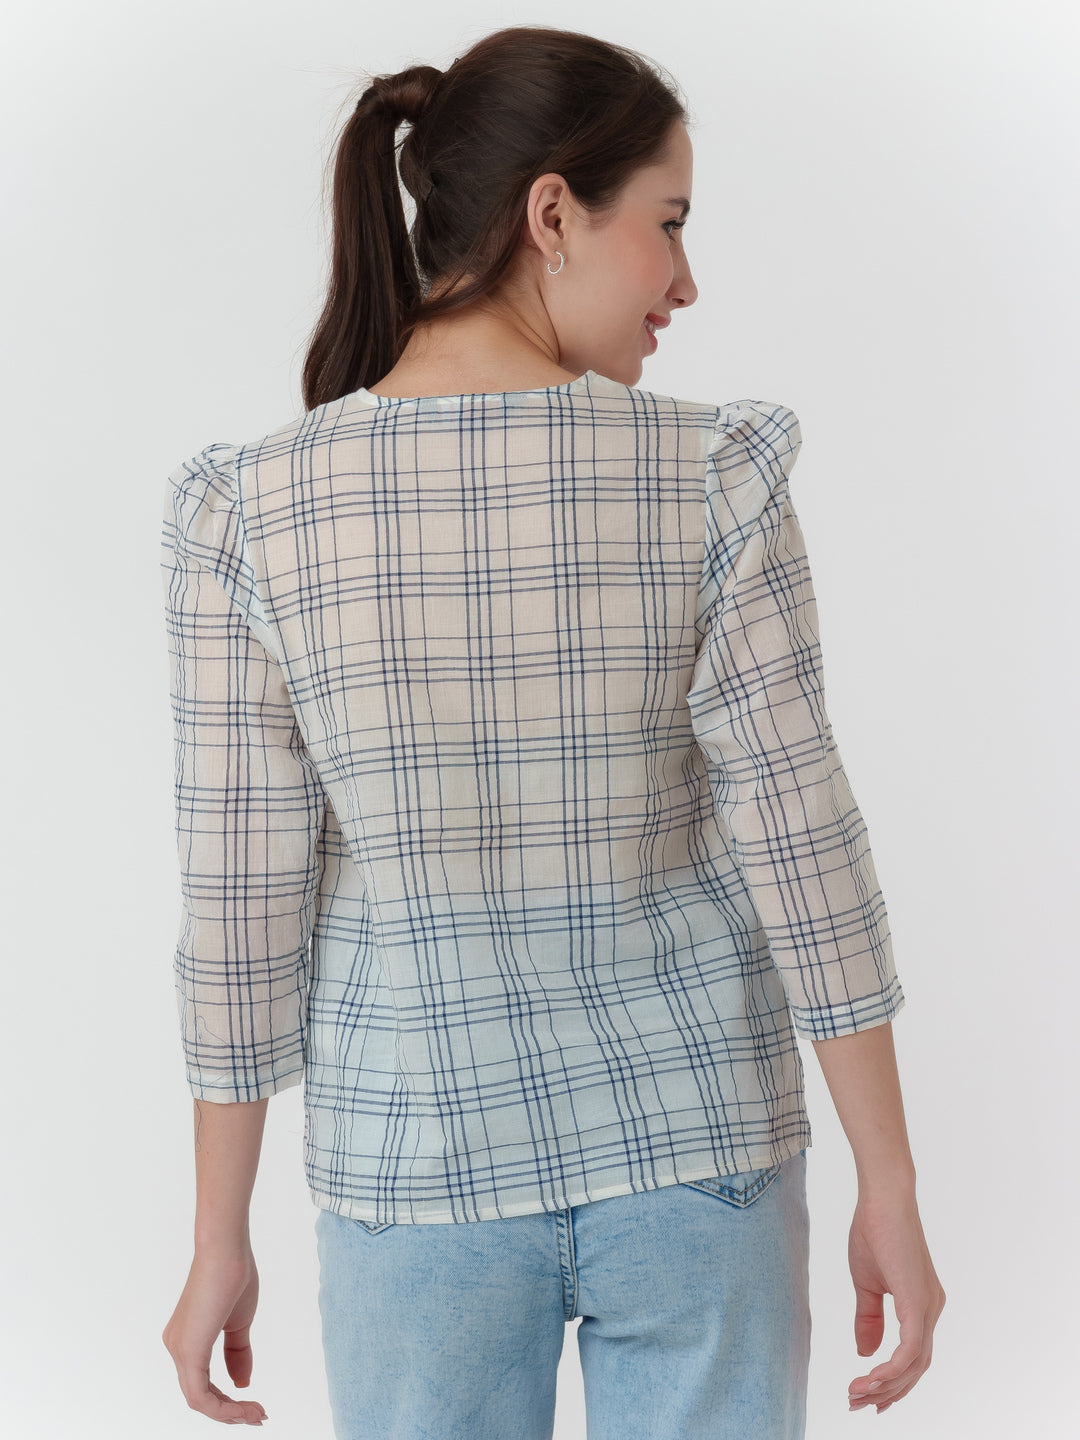 White_Checked_Shirt_Top_T07023_4